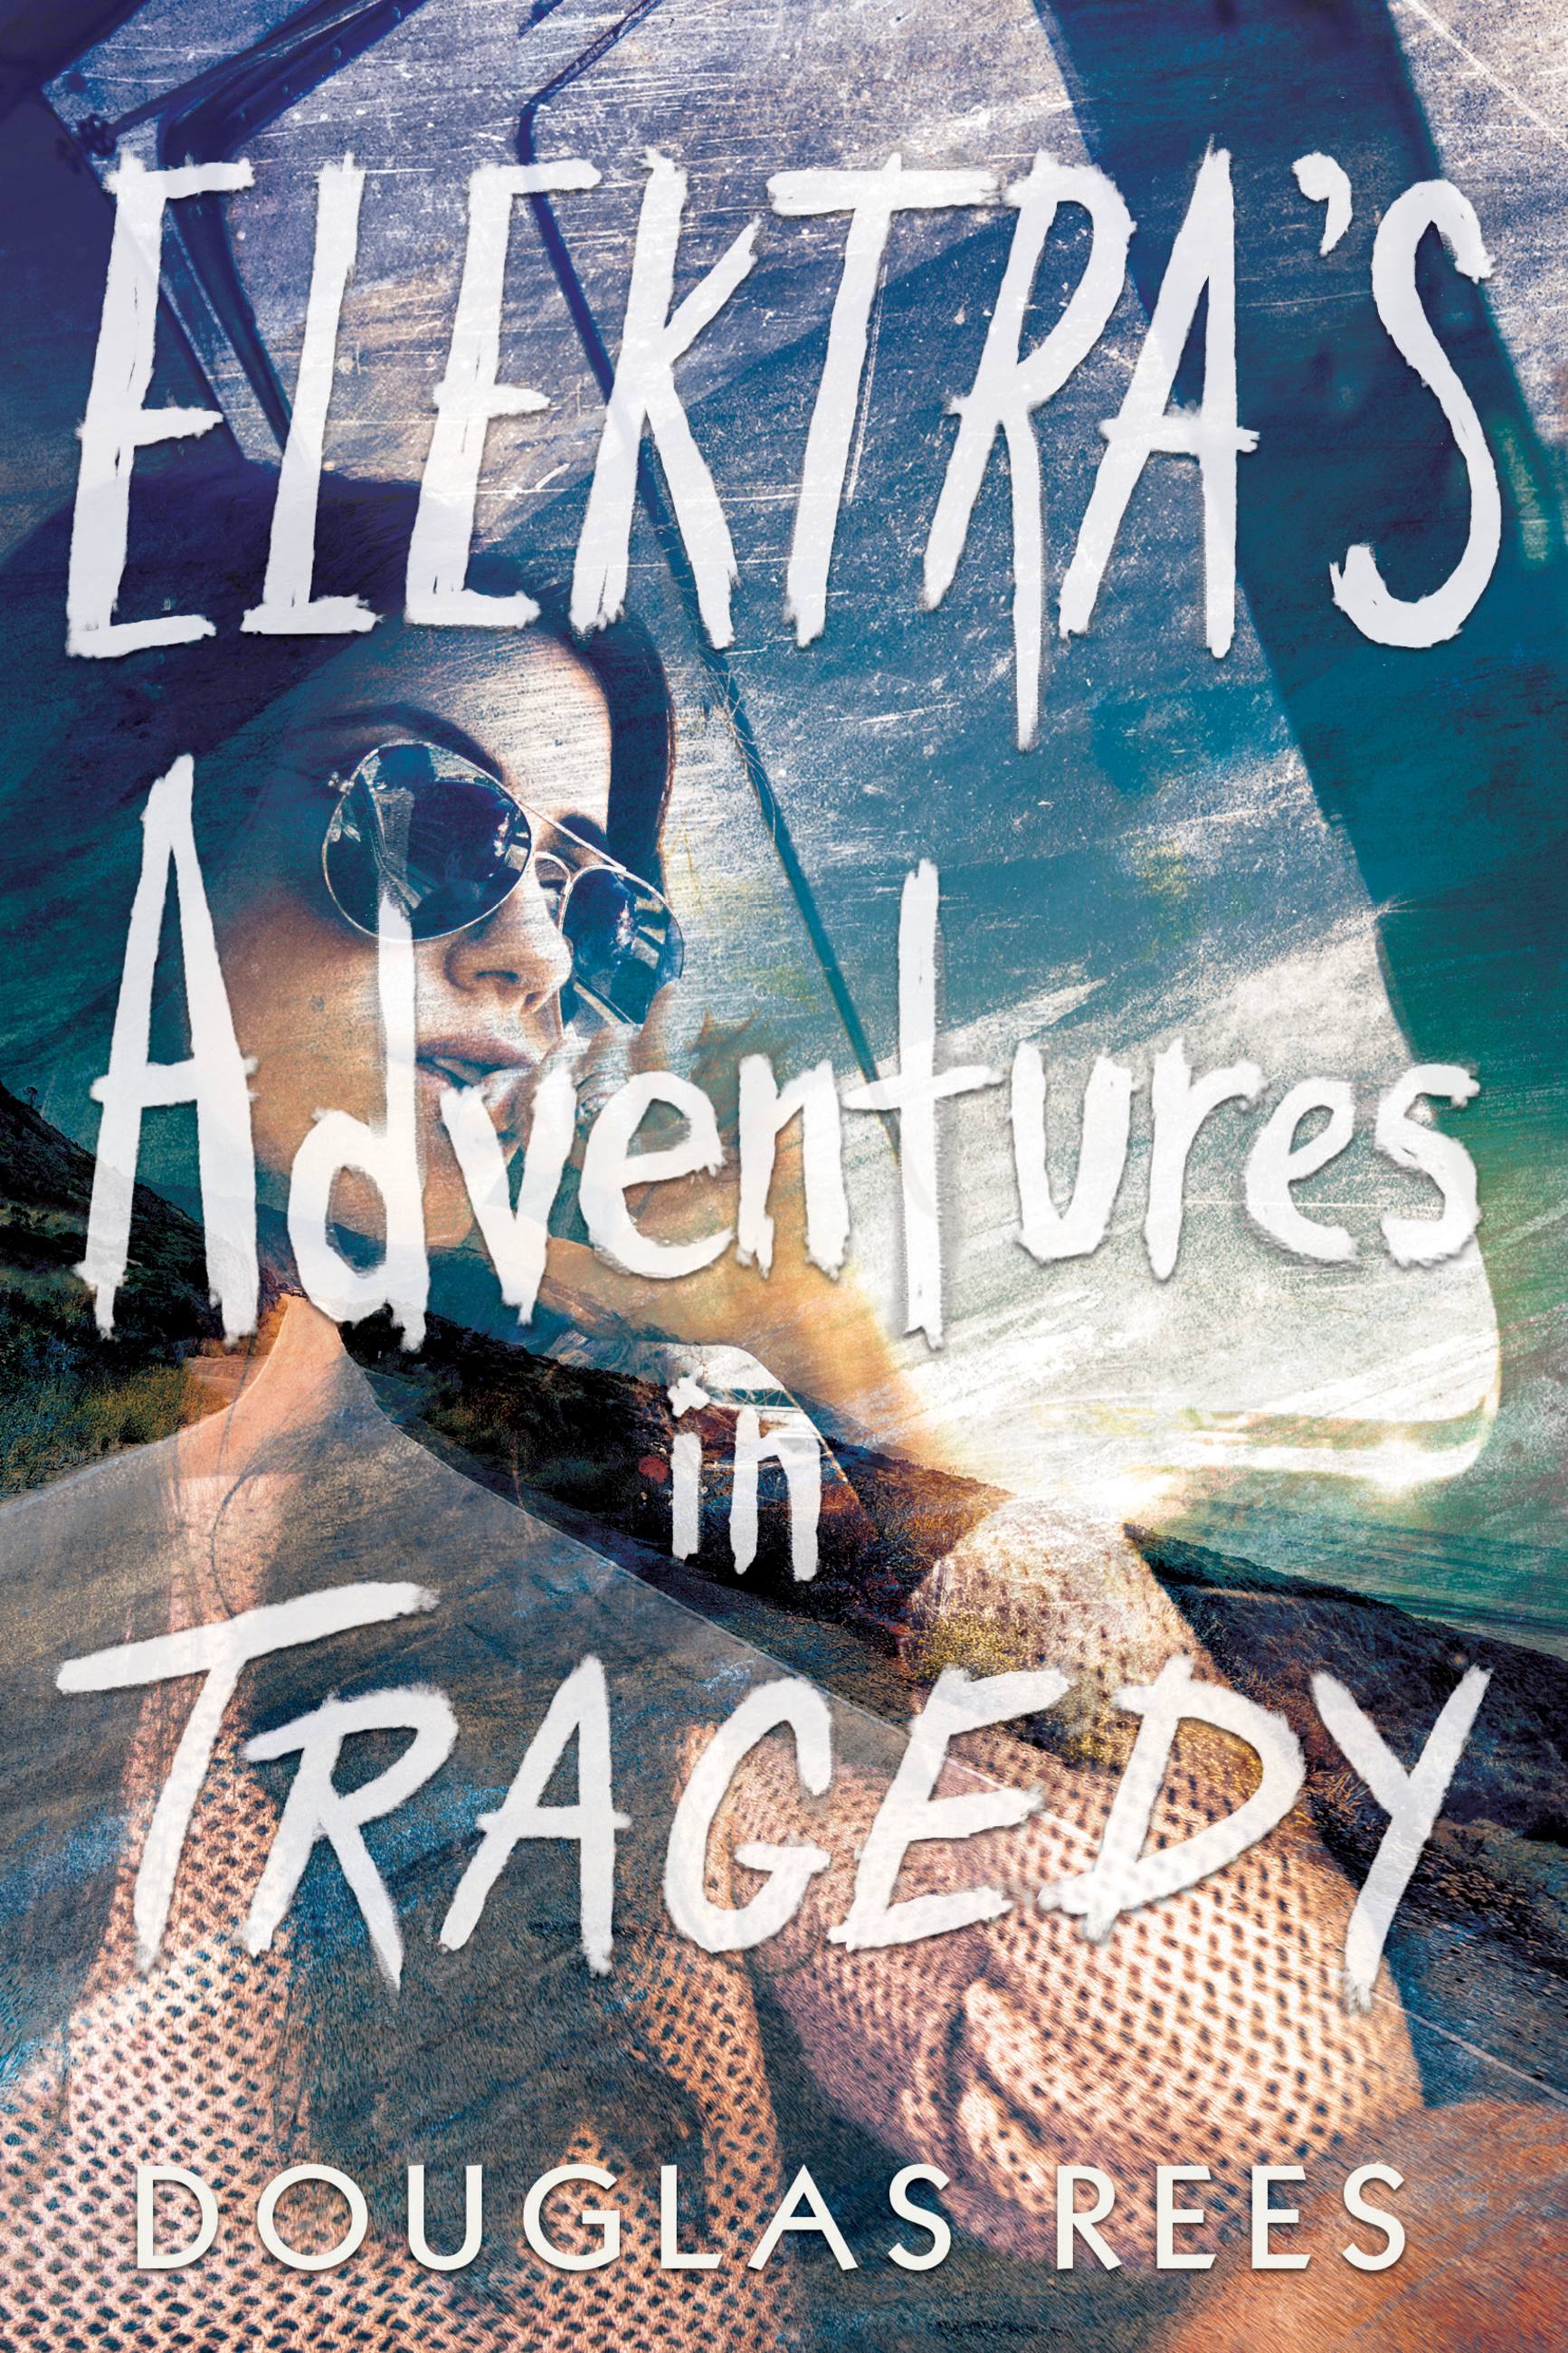 Rees　Douglas　Book　Adventures　Tragedy　in　Hachette　Group　Elektra's　by